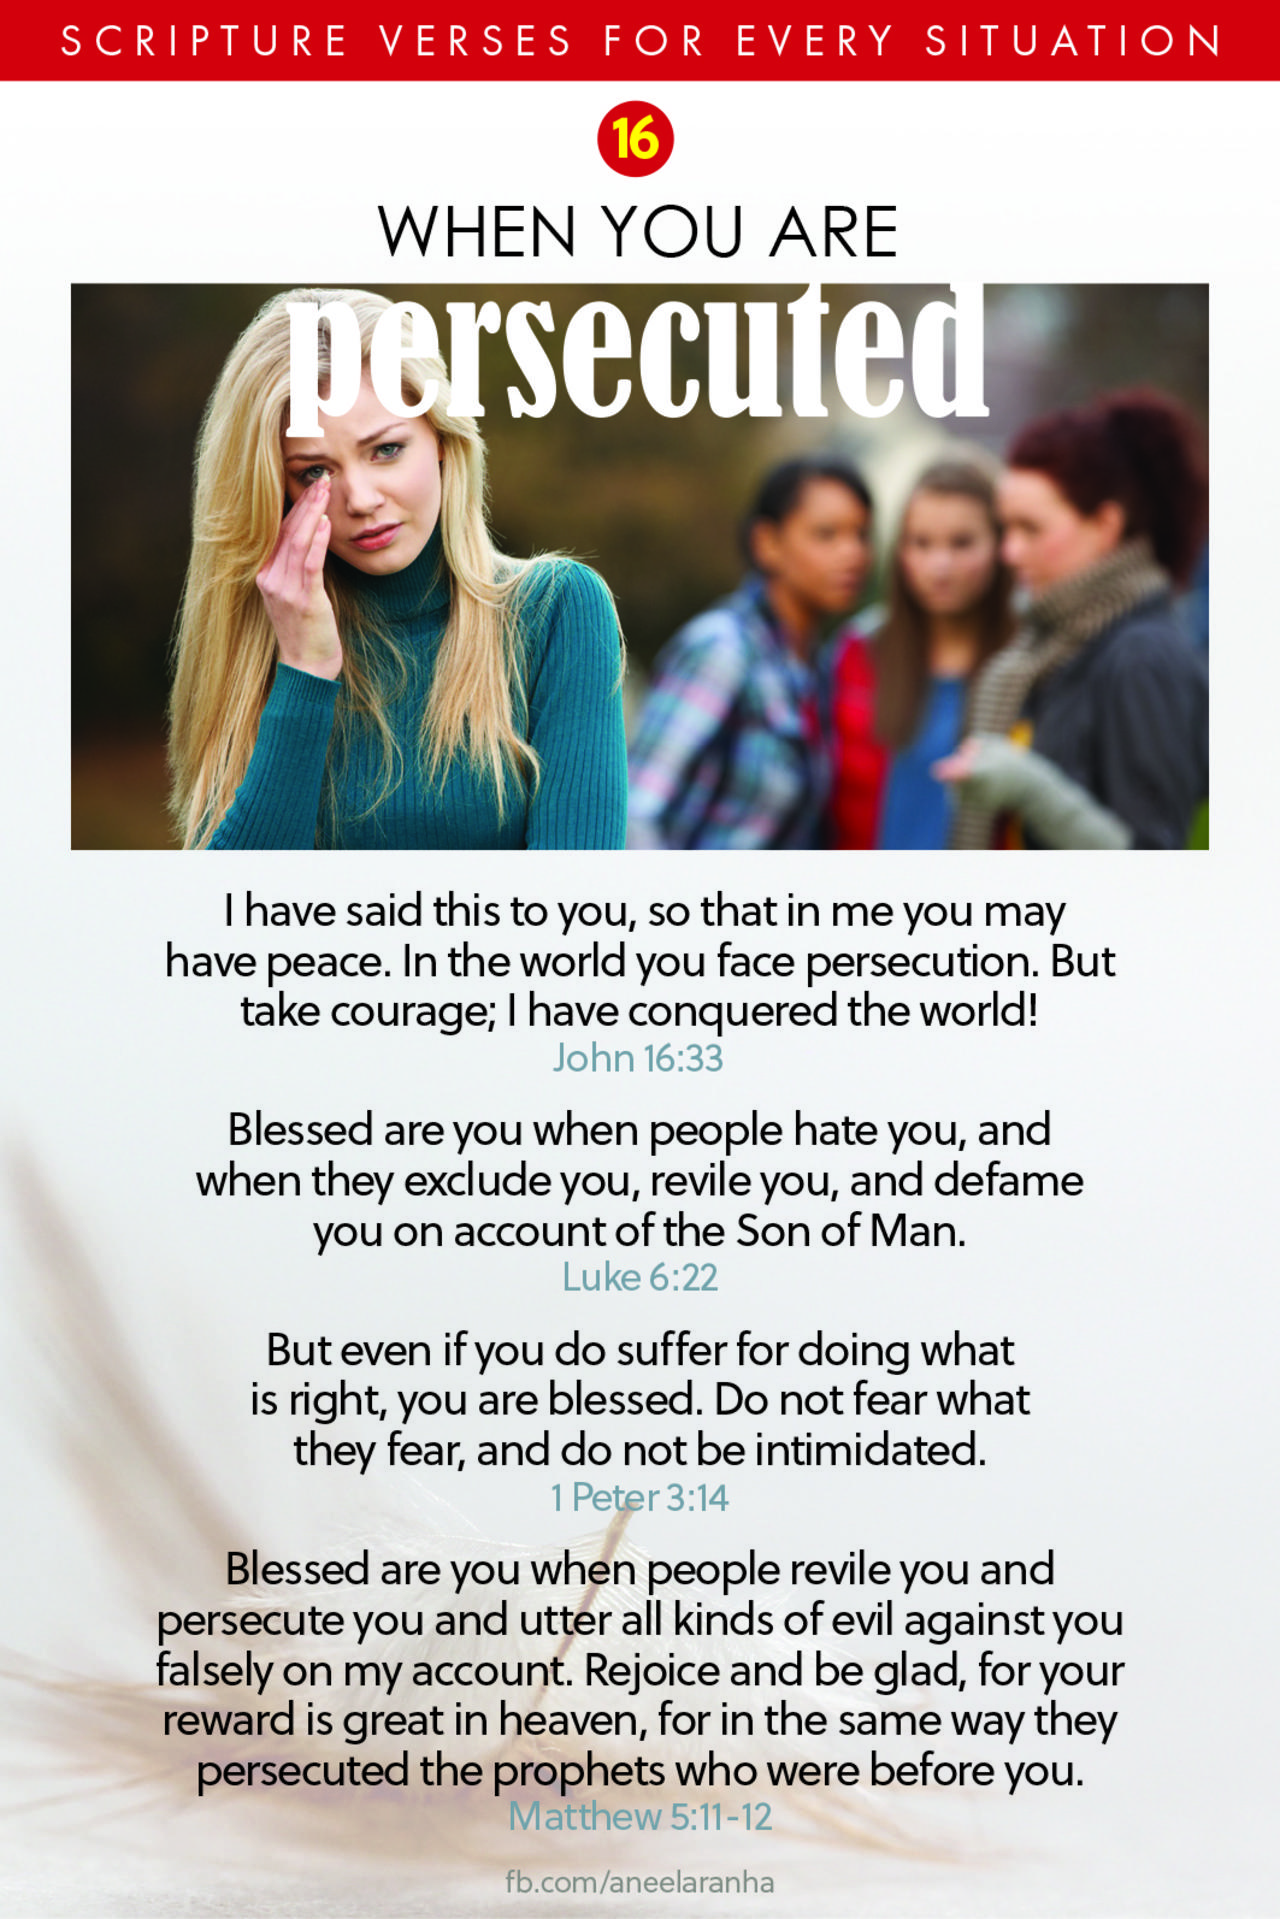 16. Do you feel persecuted?